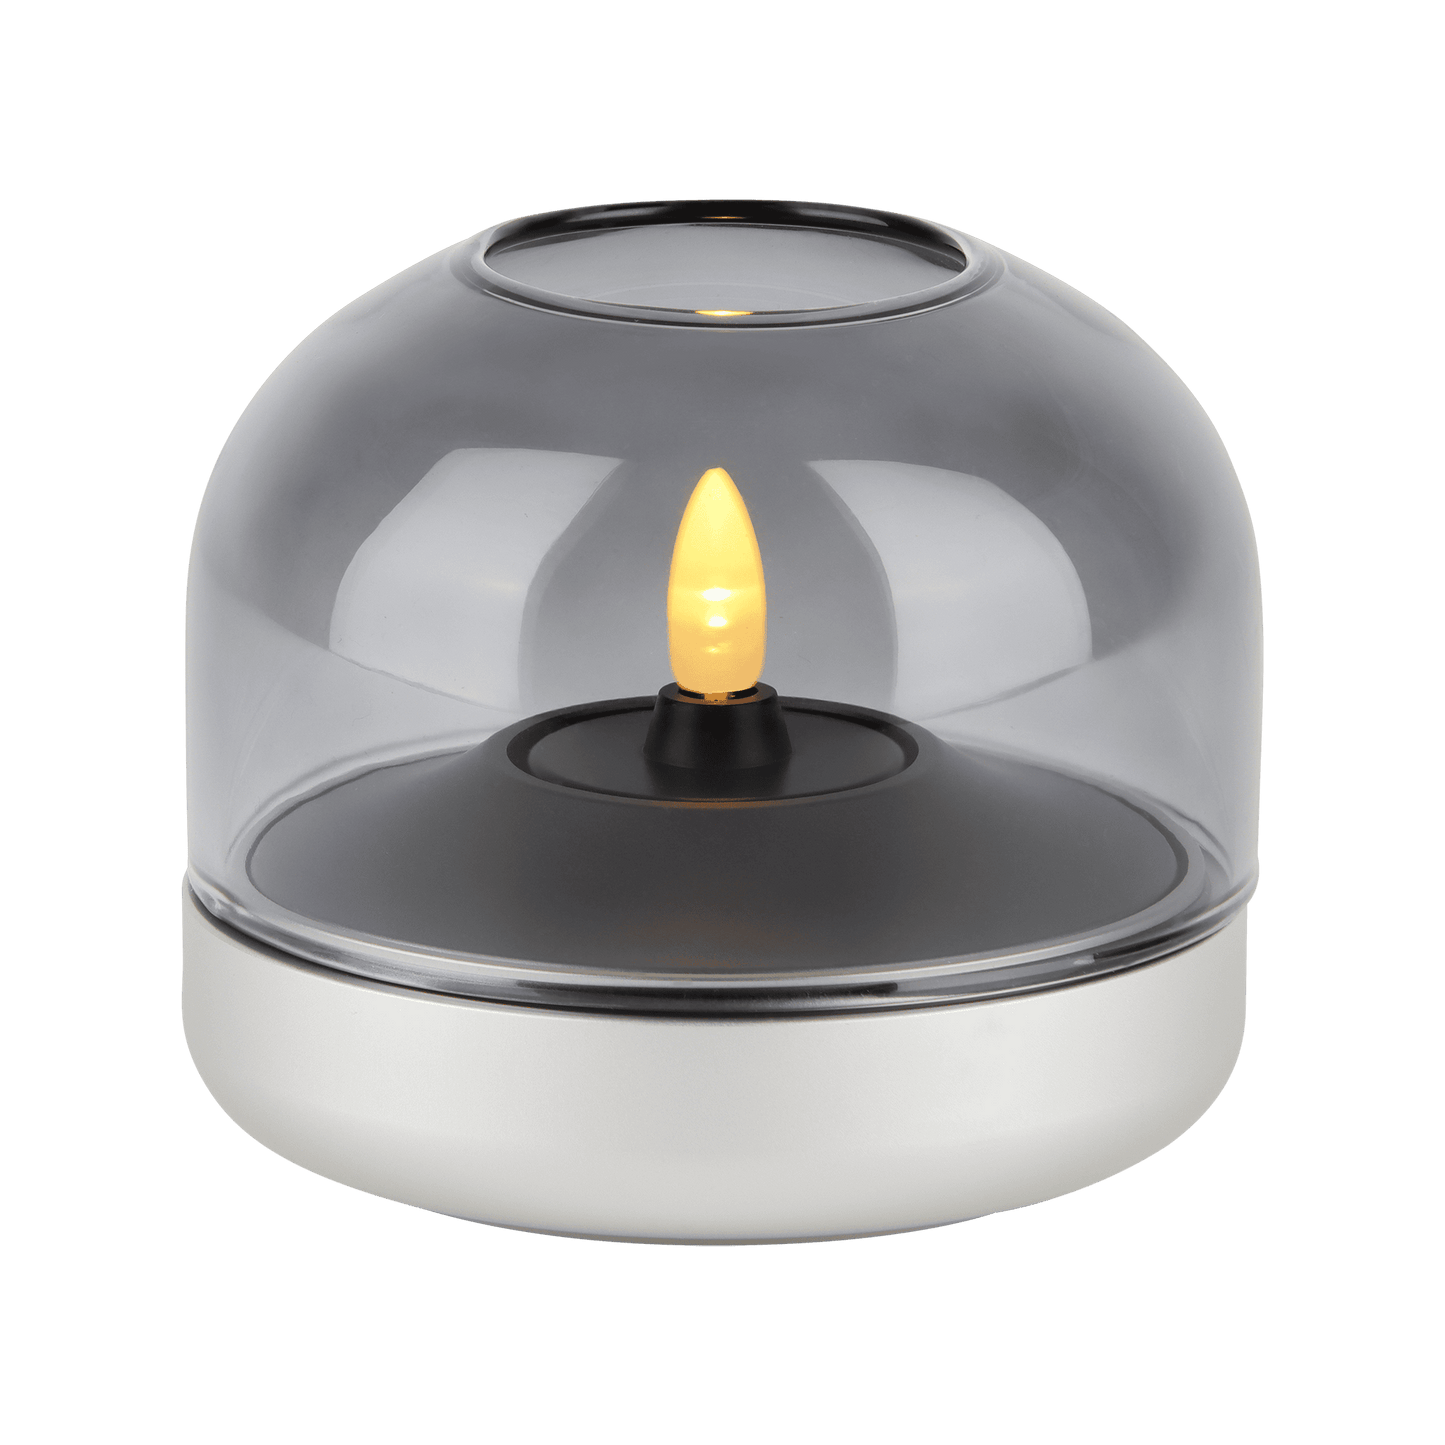 Kooduu Glow 08 Portable LED Flameless Candle in Frosted Silver (Size: ø9 x 8 cm)